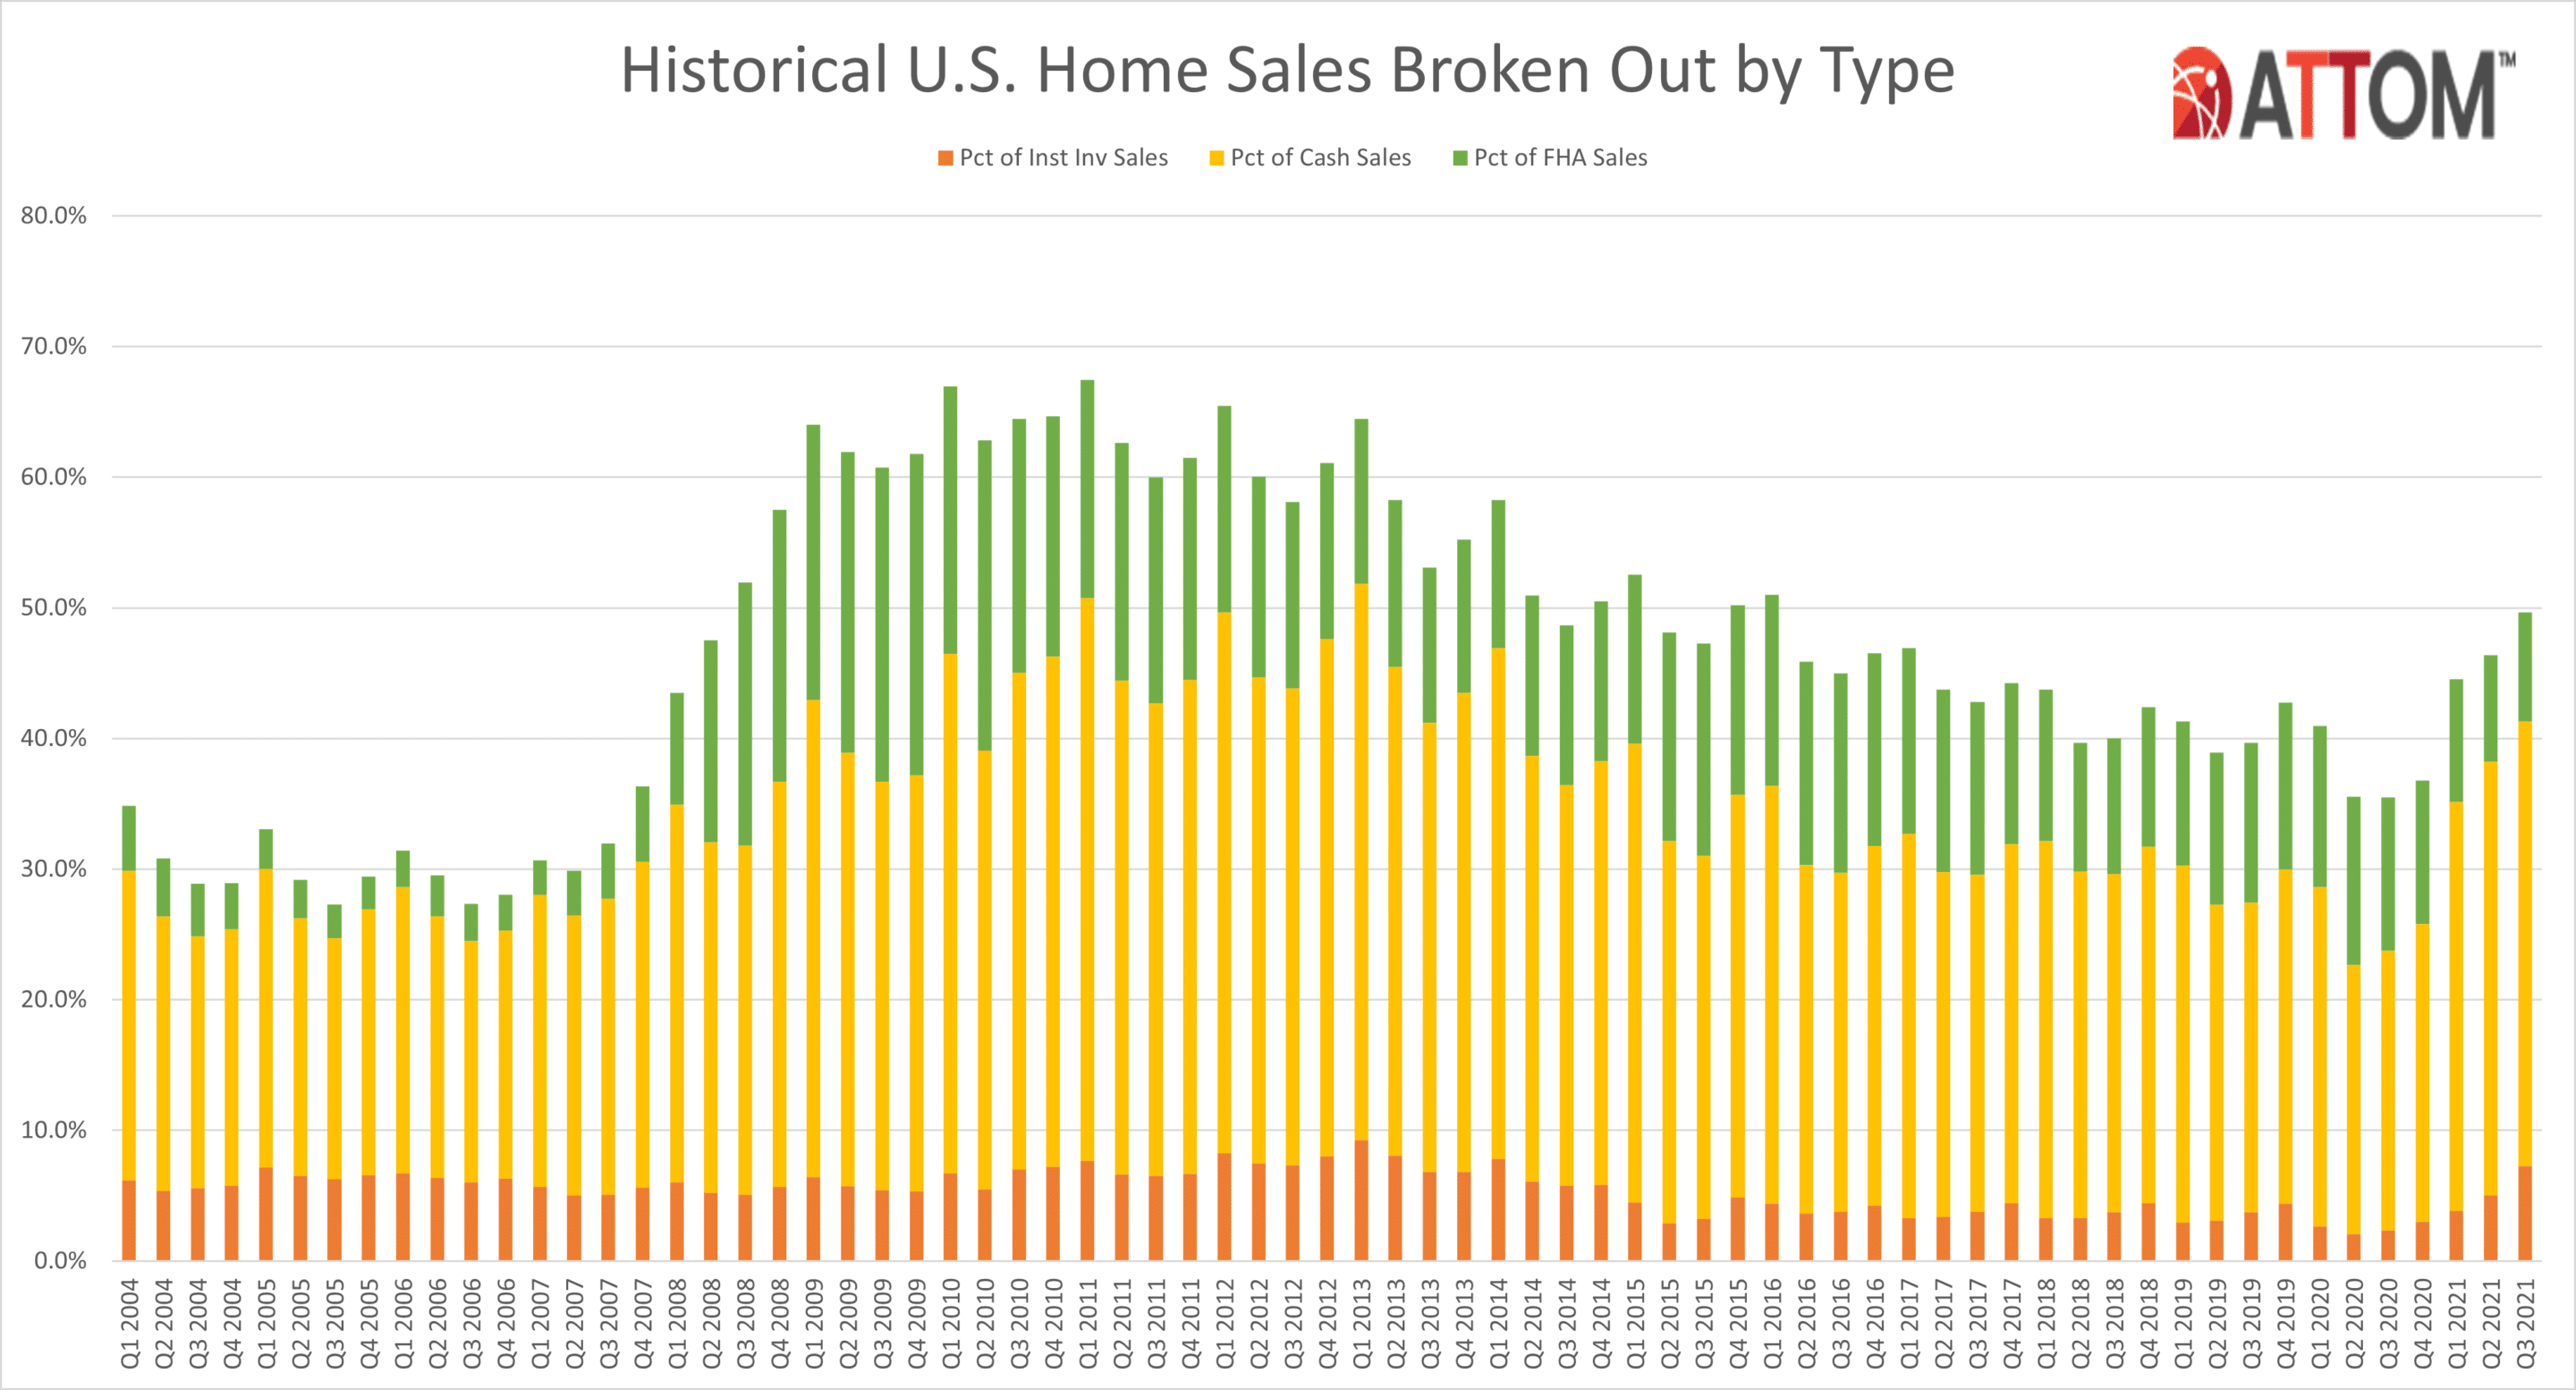 https://www.worldpropertyjournal.com/news-assets/Home-Sales-Broken-out-by-Type.png